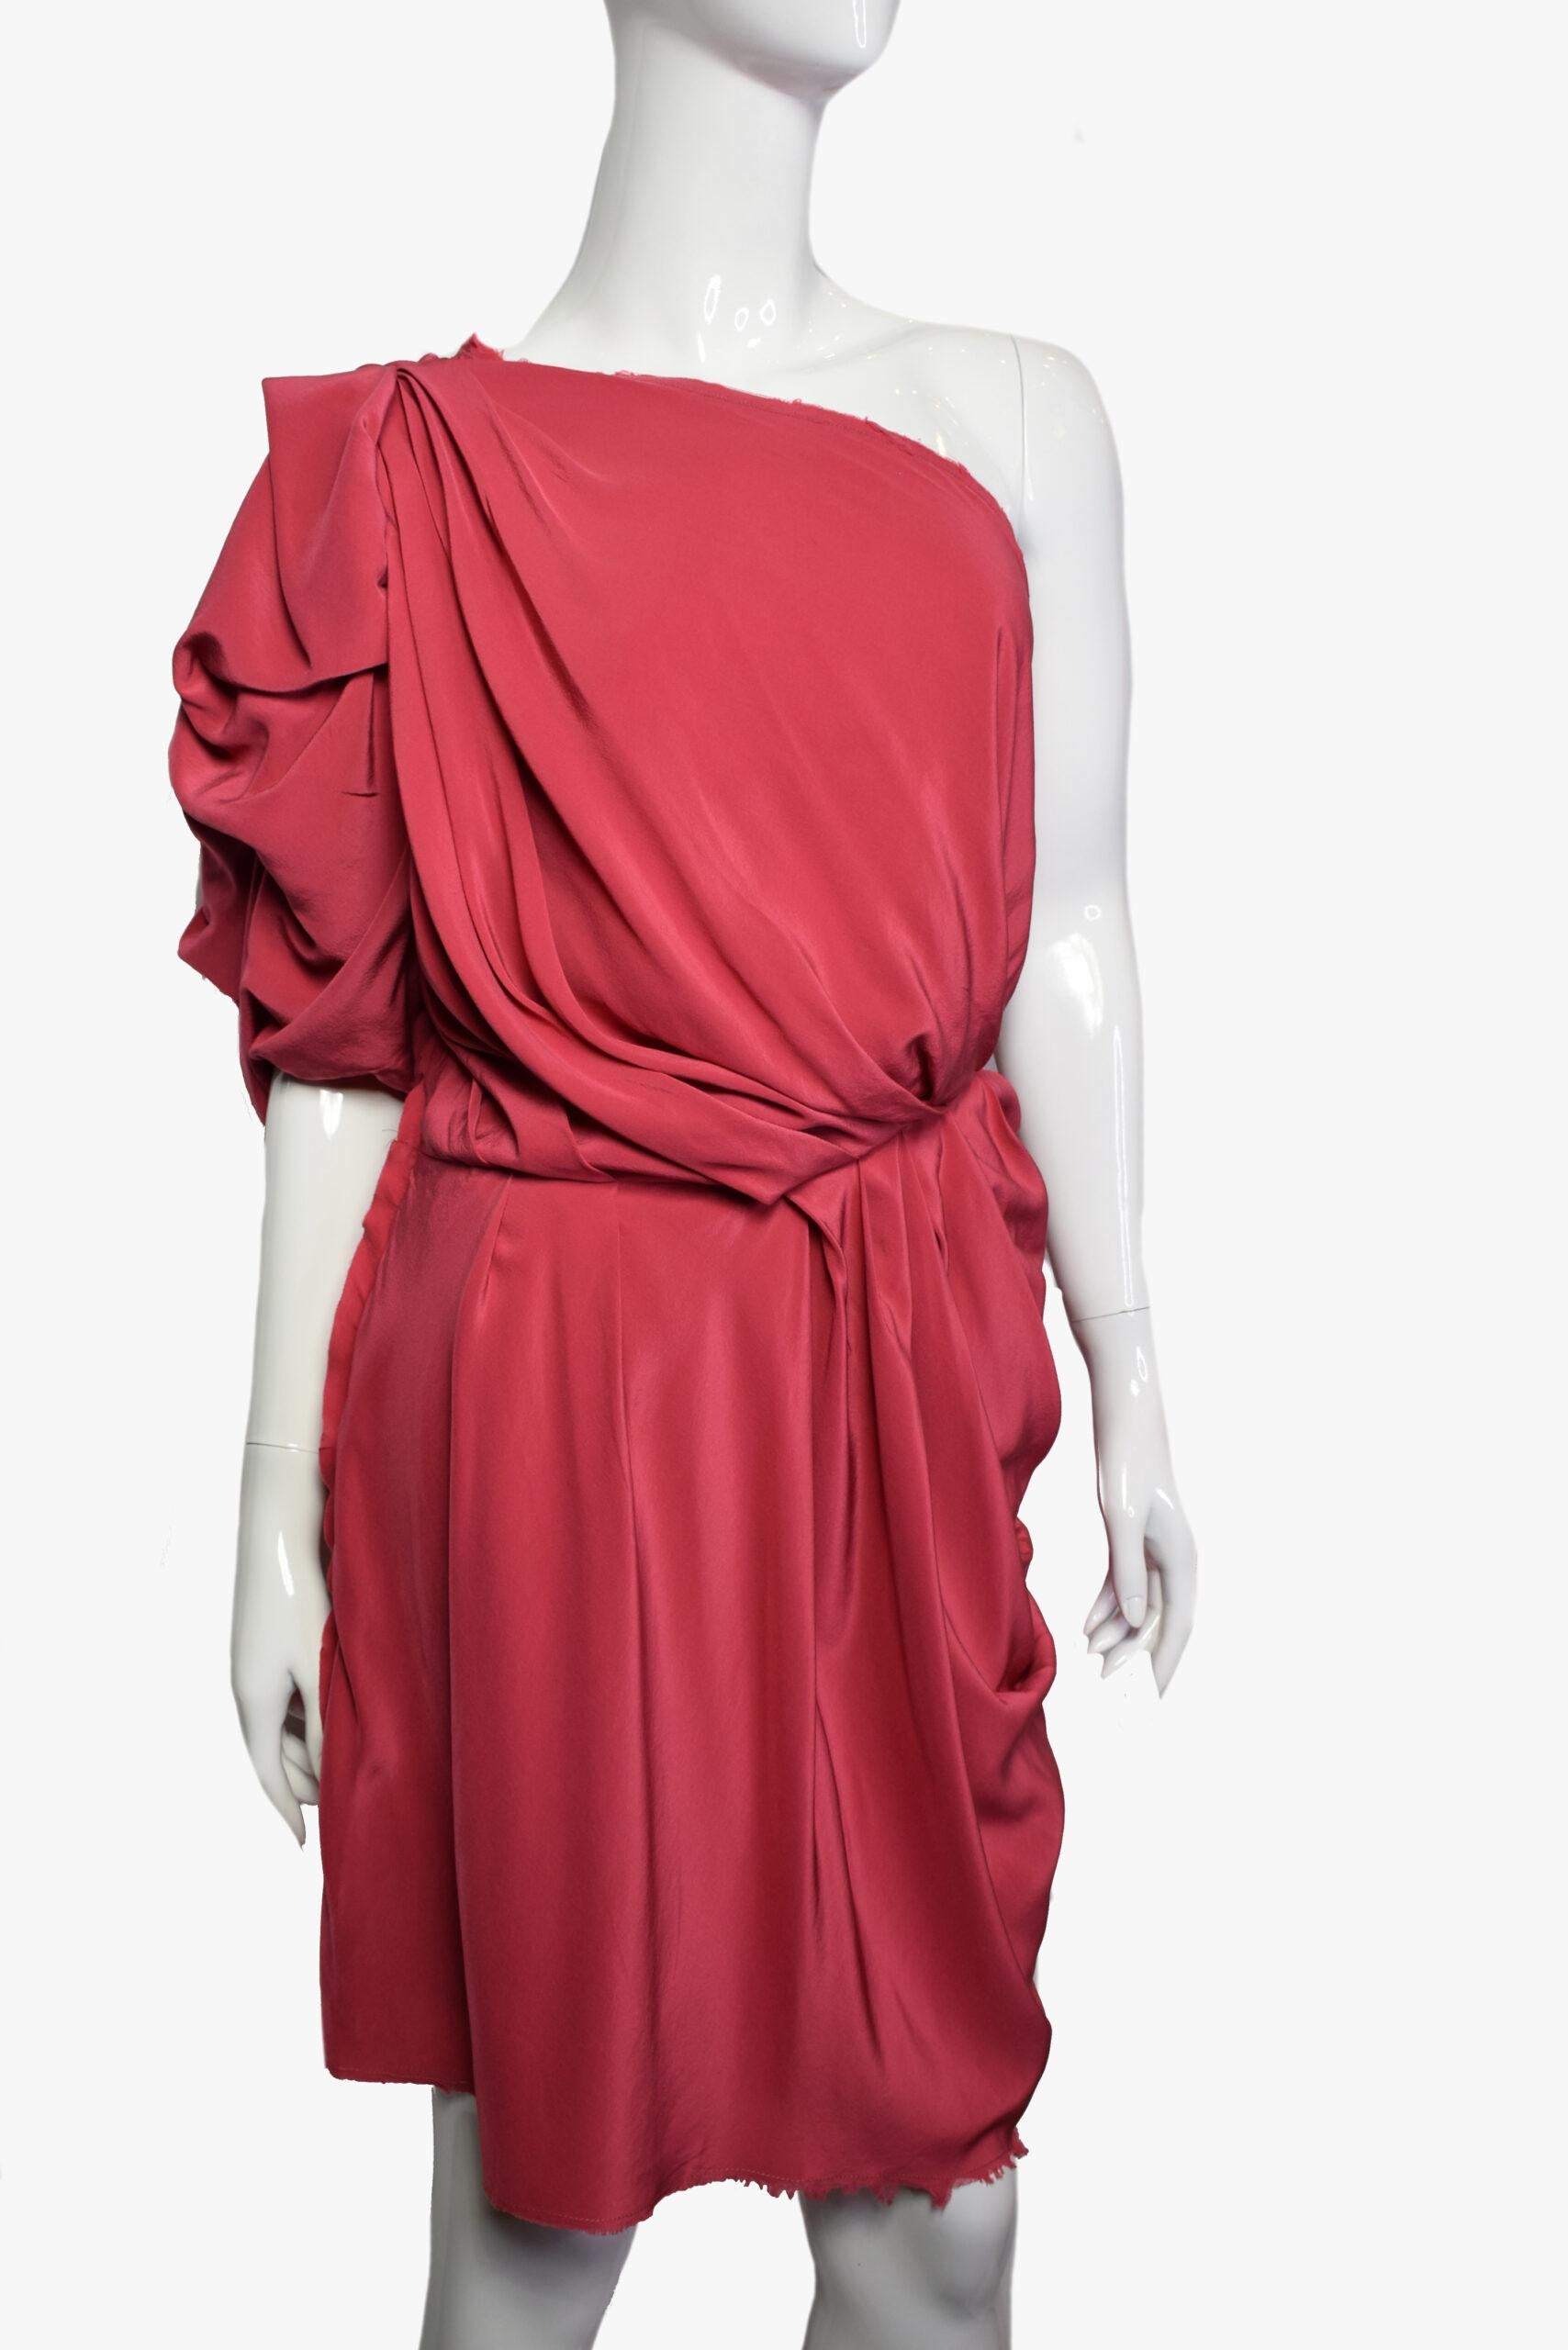 Lanvin One Shoulder Silk Mini Red Dress, 2010 In Good Condition For Sale In New York, NY